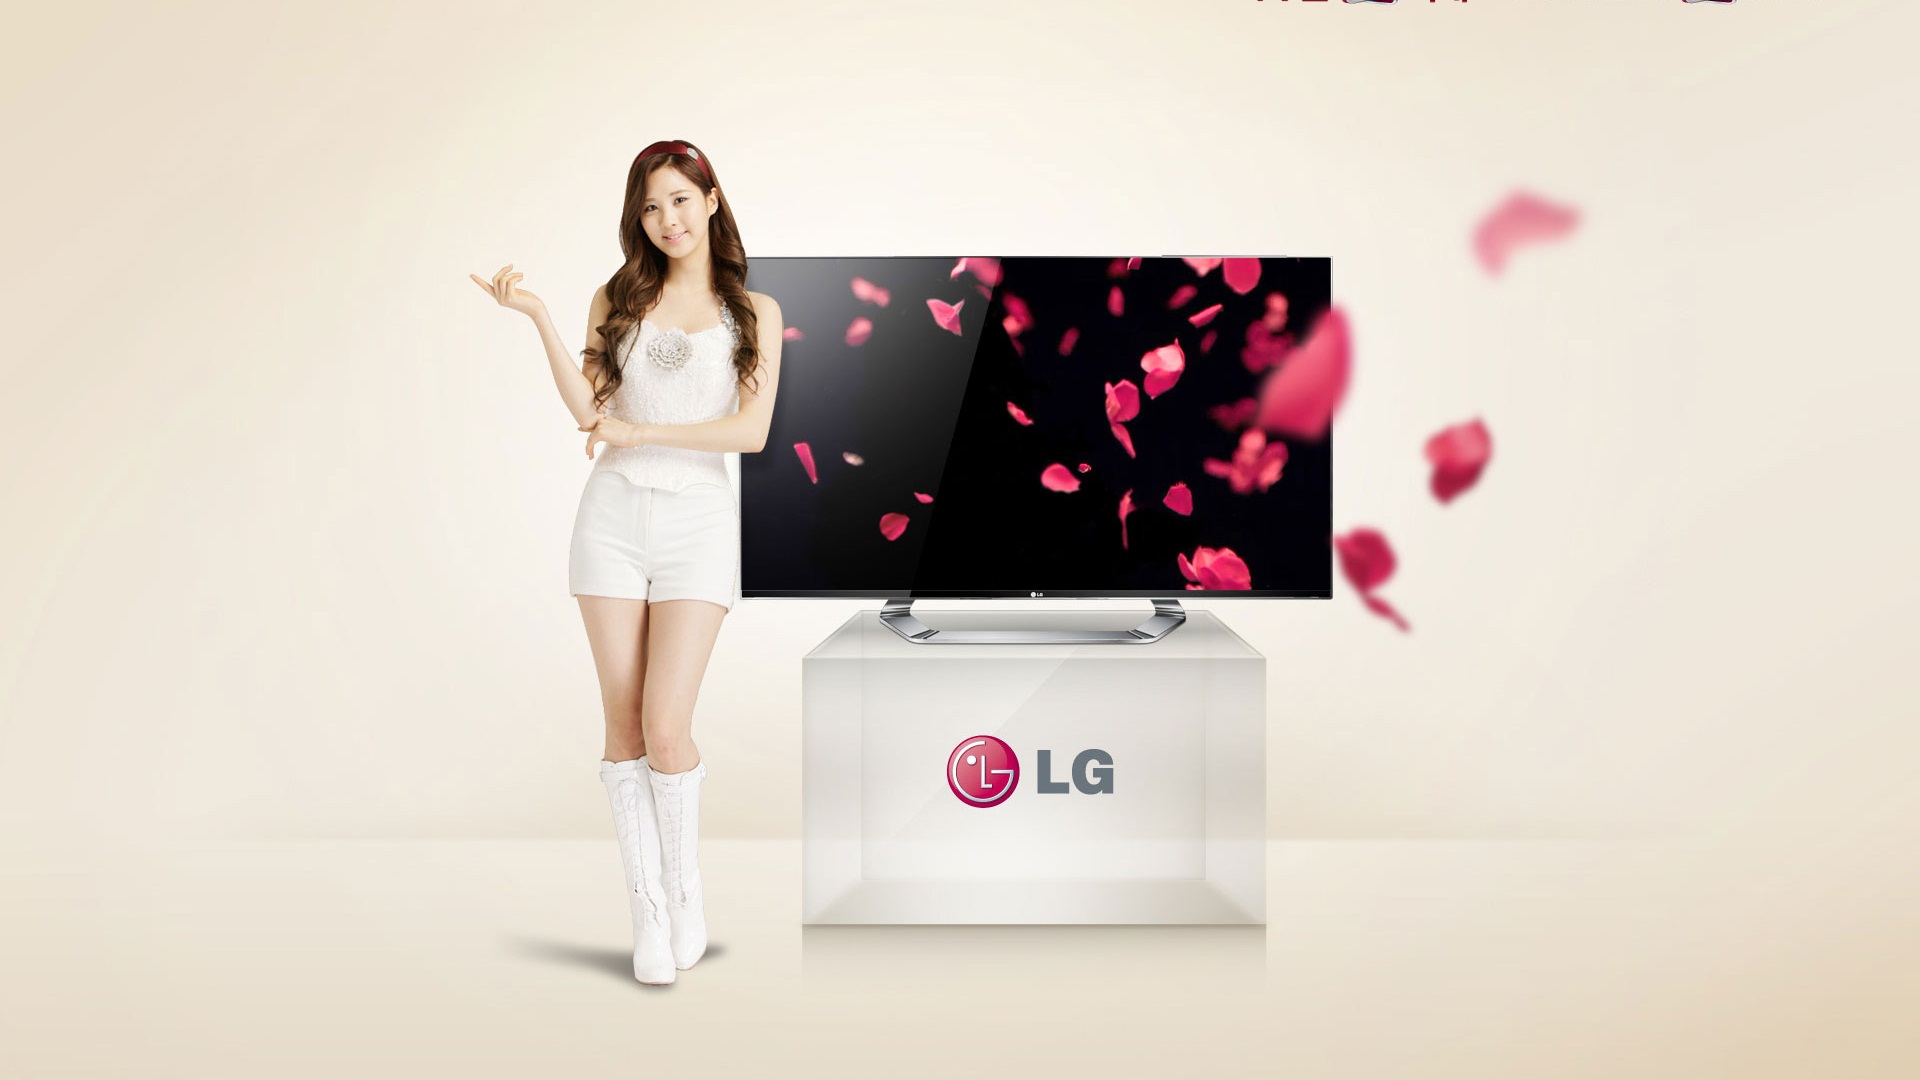 Girls Generation ACE and LG endorsements ads HD wallpapers #16 - 1920x1080